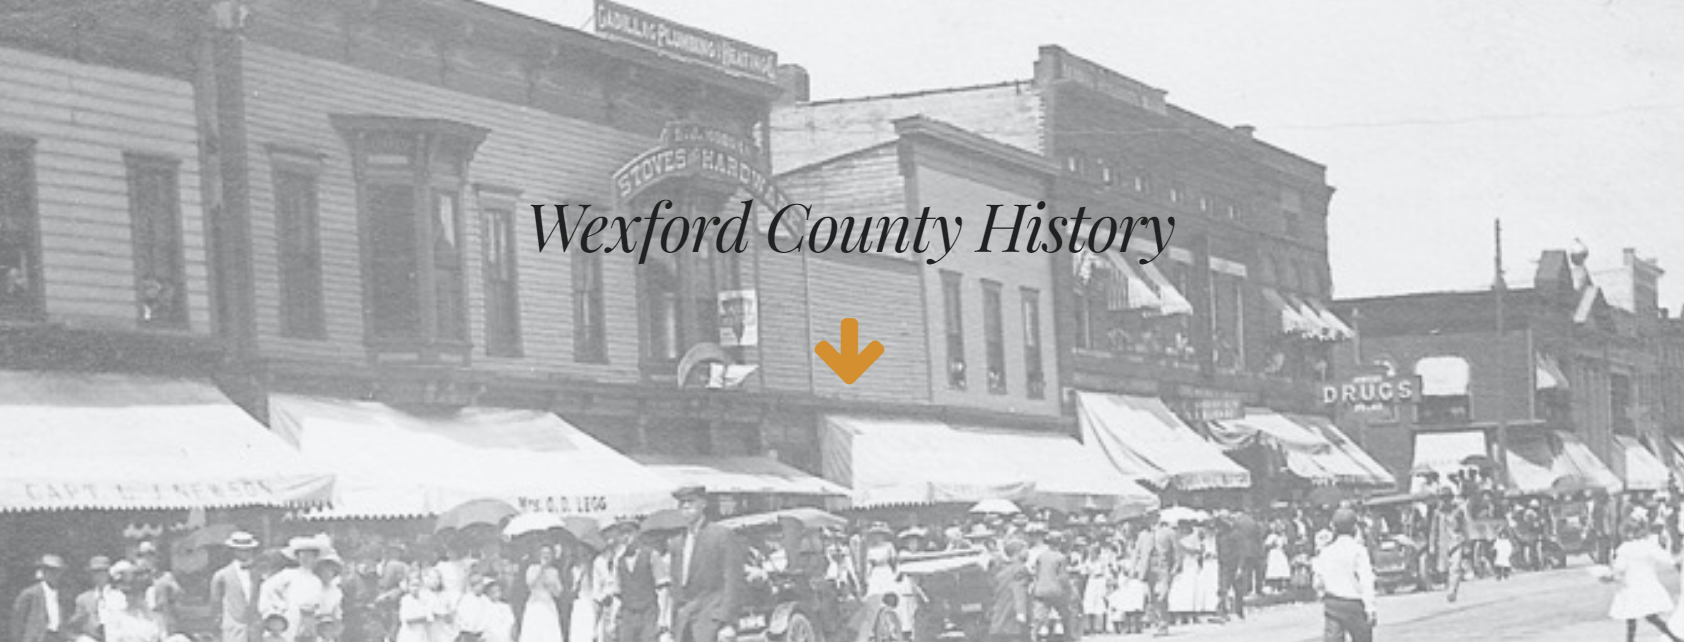 Wexford County Historical Society Museum